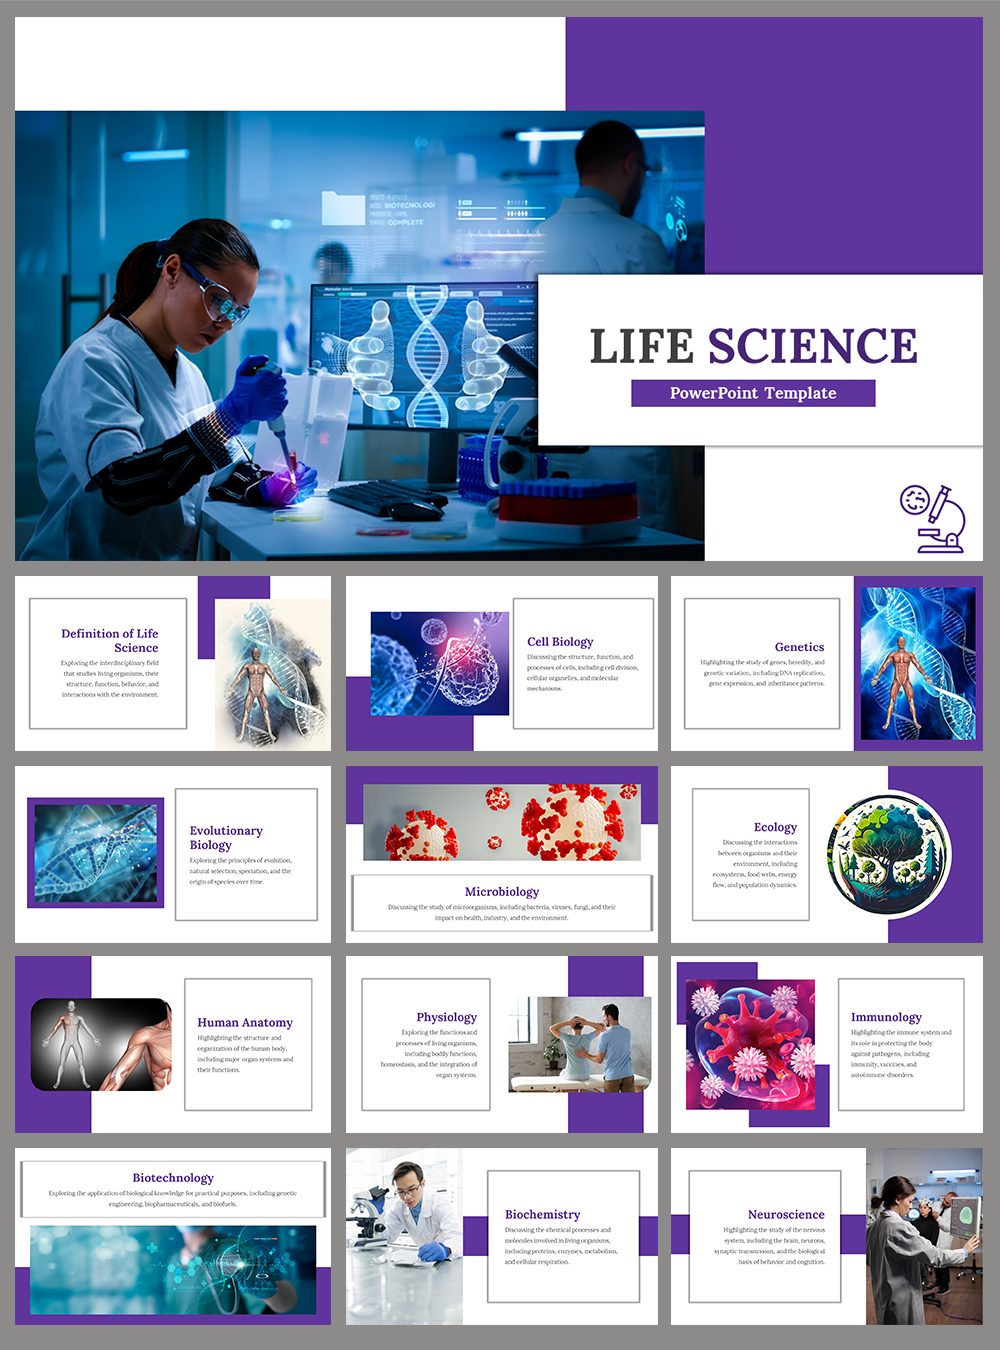 Slides　Google　Templates　PowerPoint　Science　Life　And